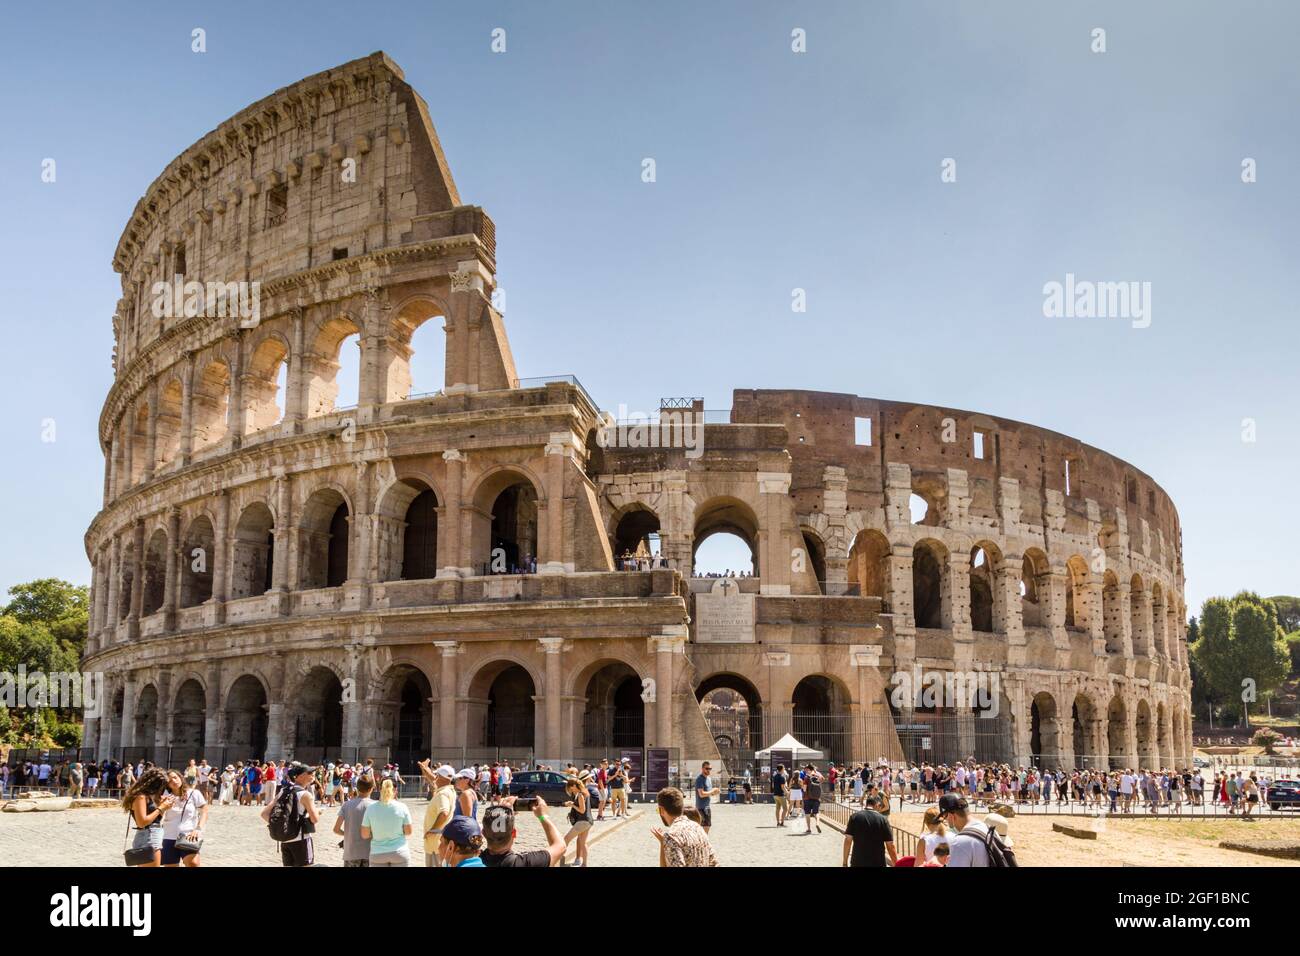 The Colosseum, Rome, Italy Stock Photo